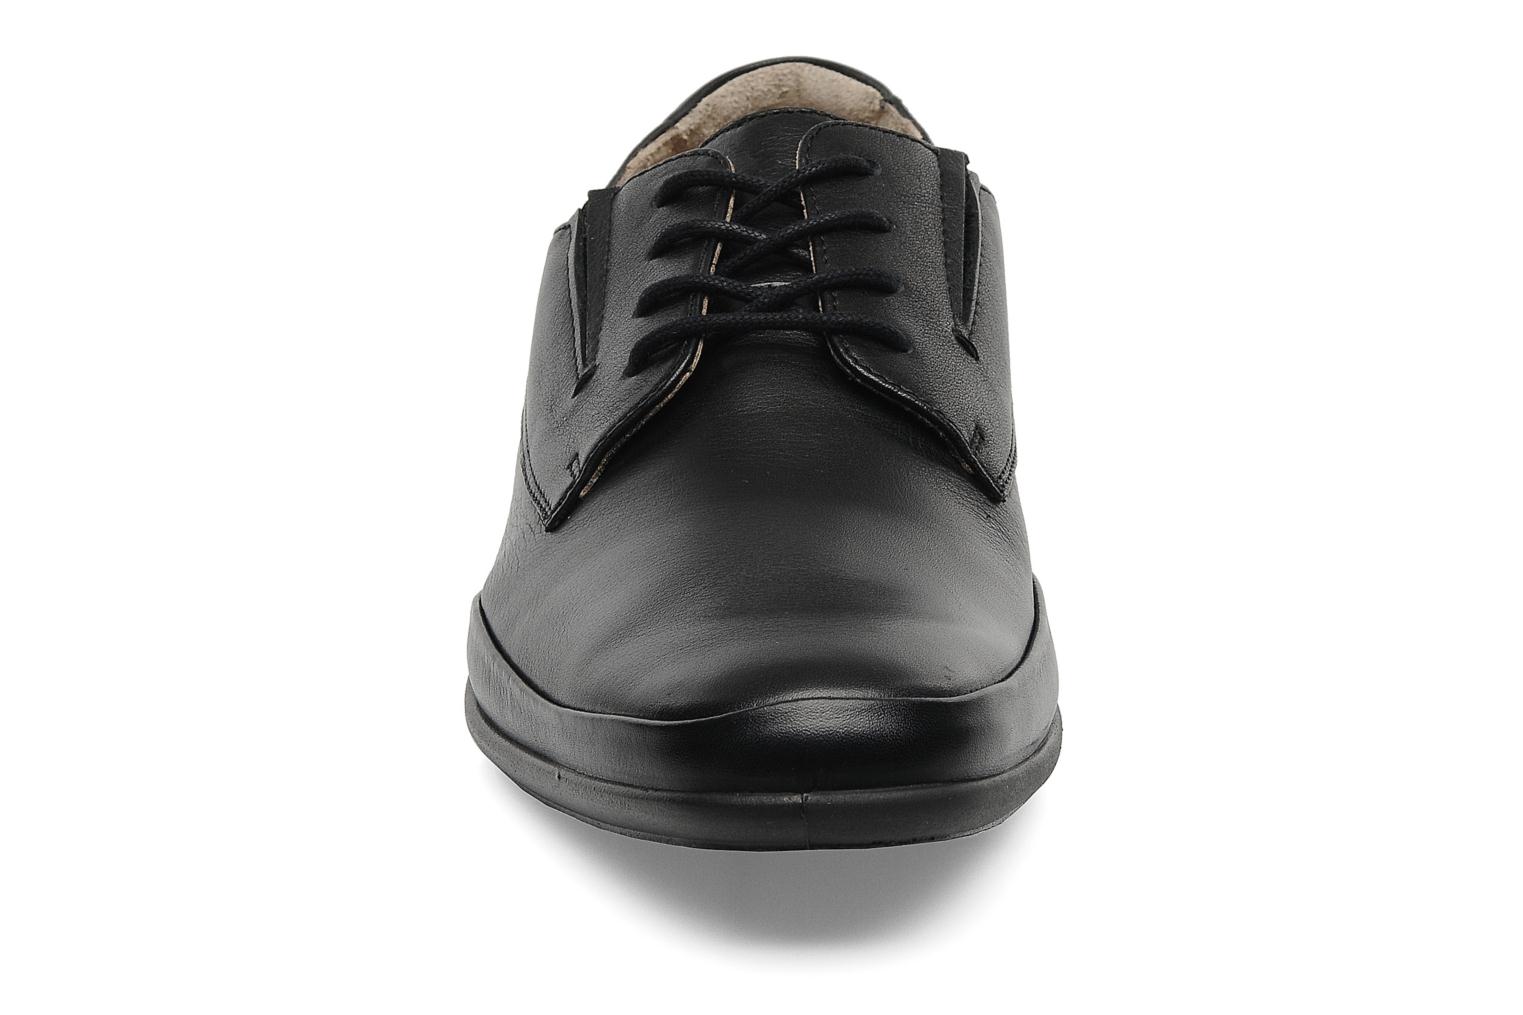 Sledgers Penalty Lace-up shoes in Black at Sarenza.co.uk (154621)